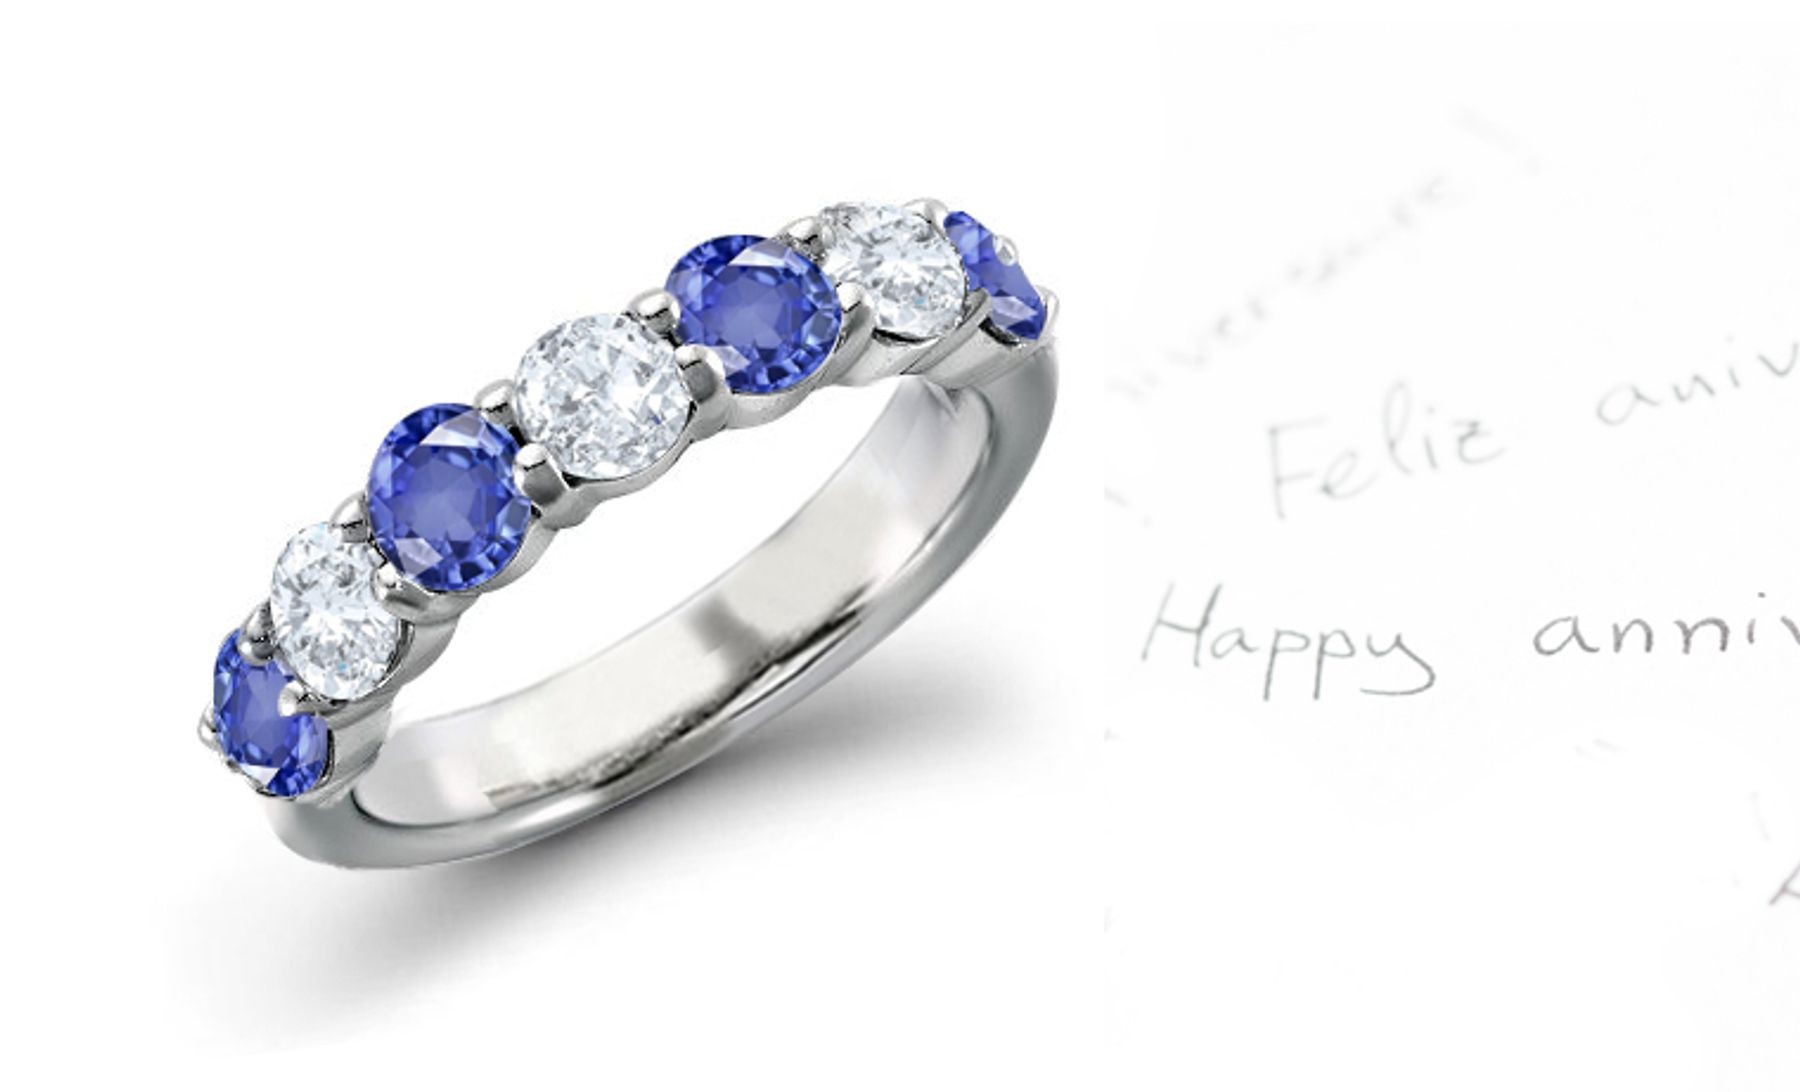 7 Stone Blue Sapphire & Diamond Ring in 1 to 3 carats tw